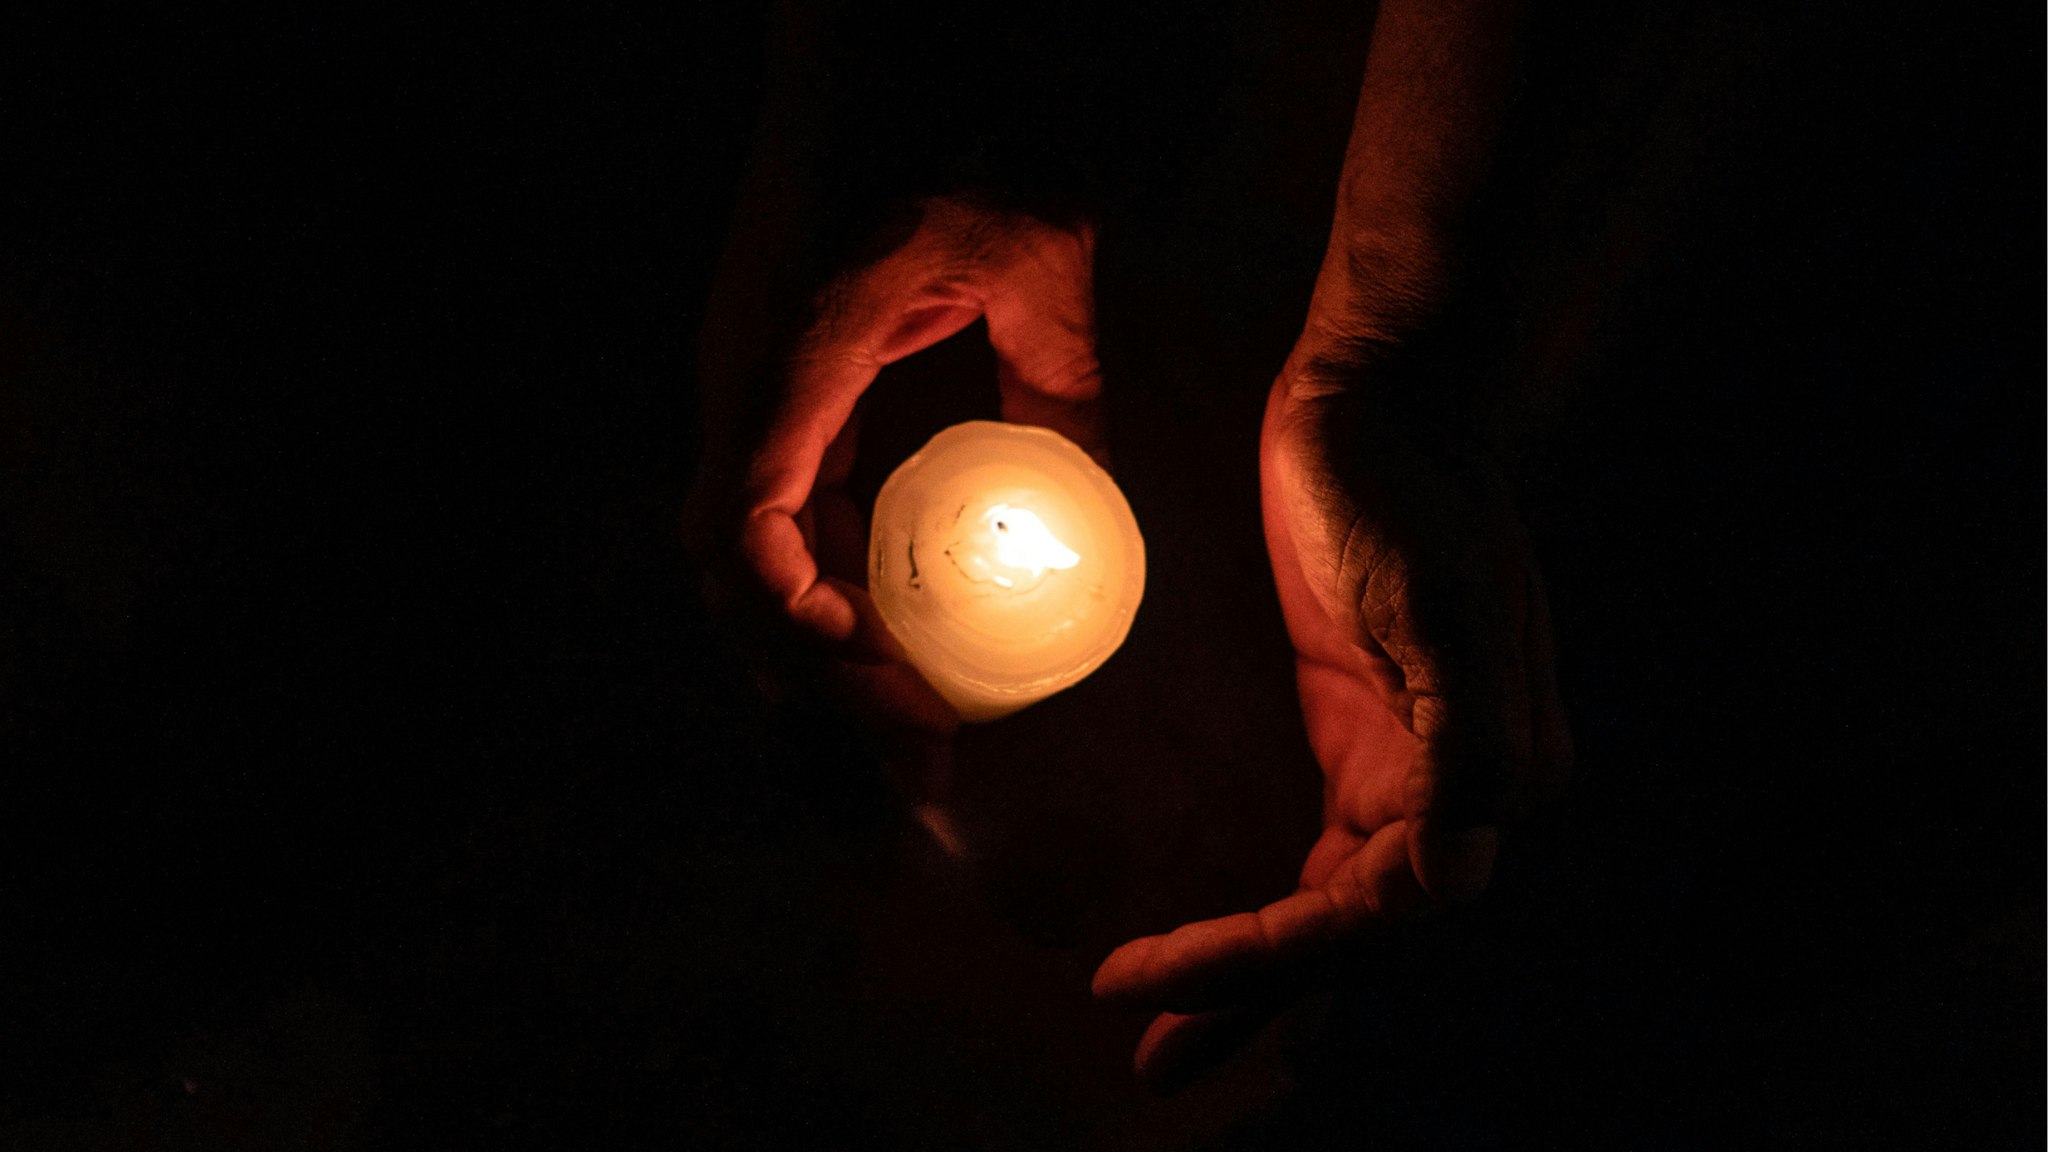 A member of the Pueblos Sin Fronteras, a pro-immigration advocacy group, lights a candle during a vigil to raise awareness of local police harassment and abuse of migrants, deported migrants and homeless in Tijuana, Baja California state, on September 16, 2018.